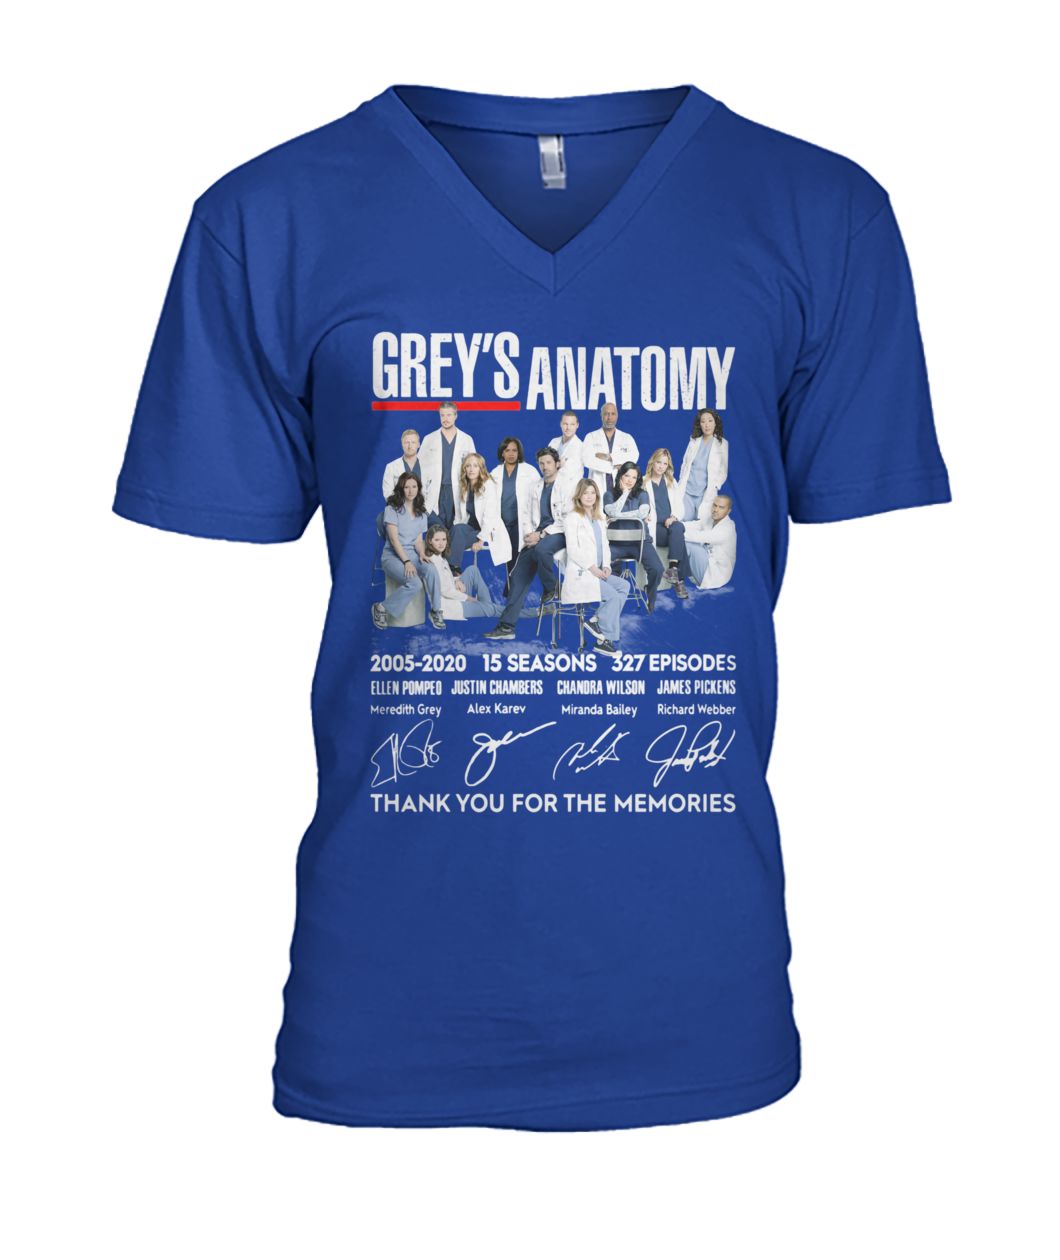 Grey's anatomy 2005-2020 15 seasons 327 episode thank you for the memories signatures mens v-neck